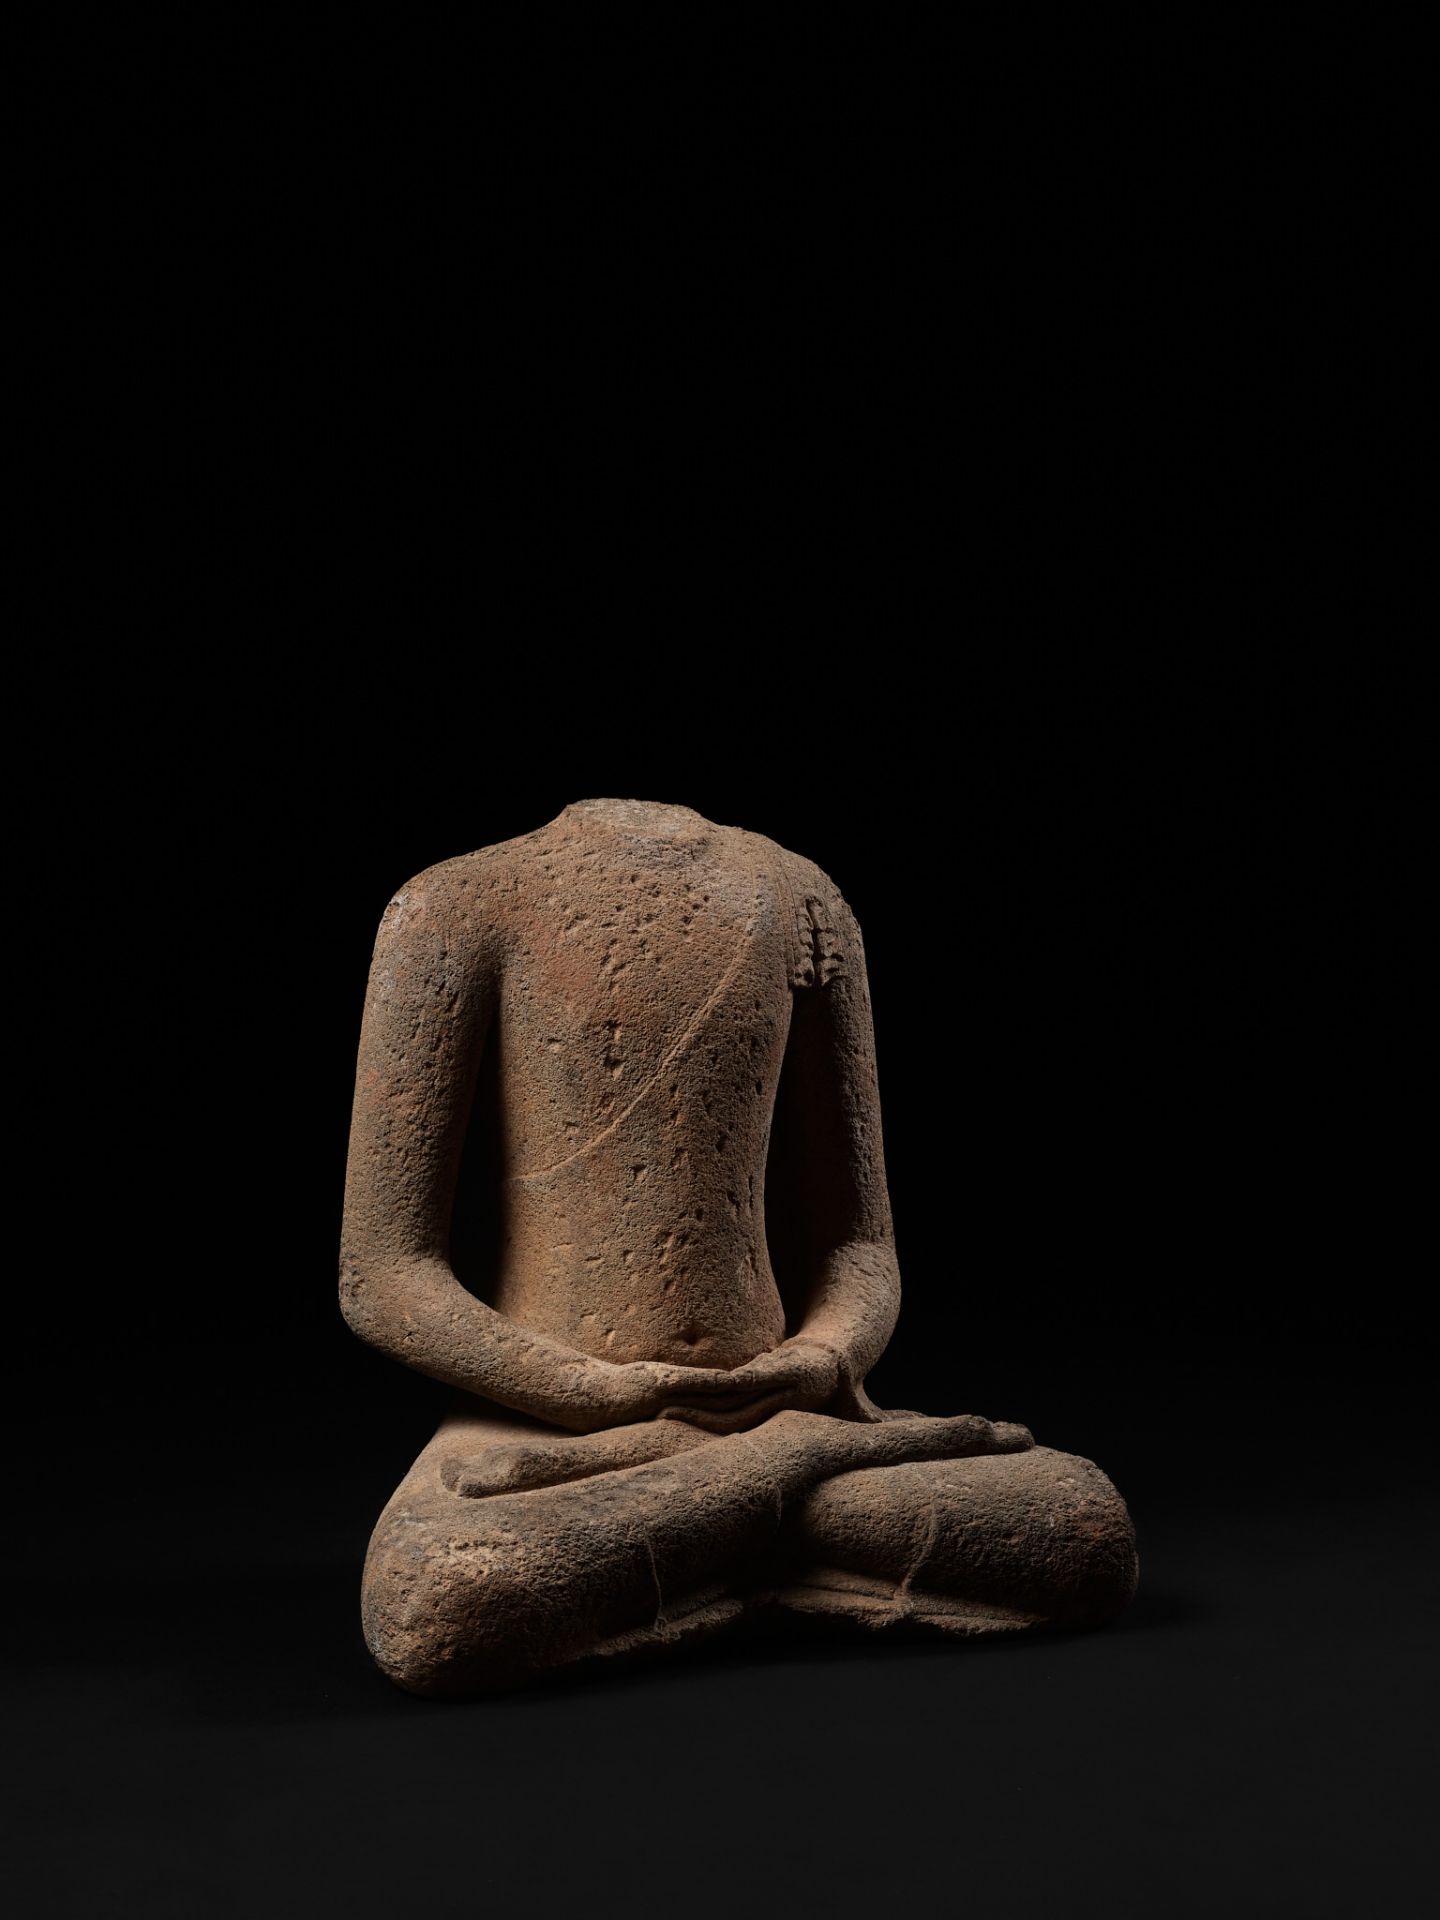 A RARE AND LARGE ANDESITE TORSO OF BUDDHA AMITABHA, CENTRAL JAVANESE PERIOD, SHAILENDRA DYNASTY - Image 15 of 16